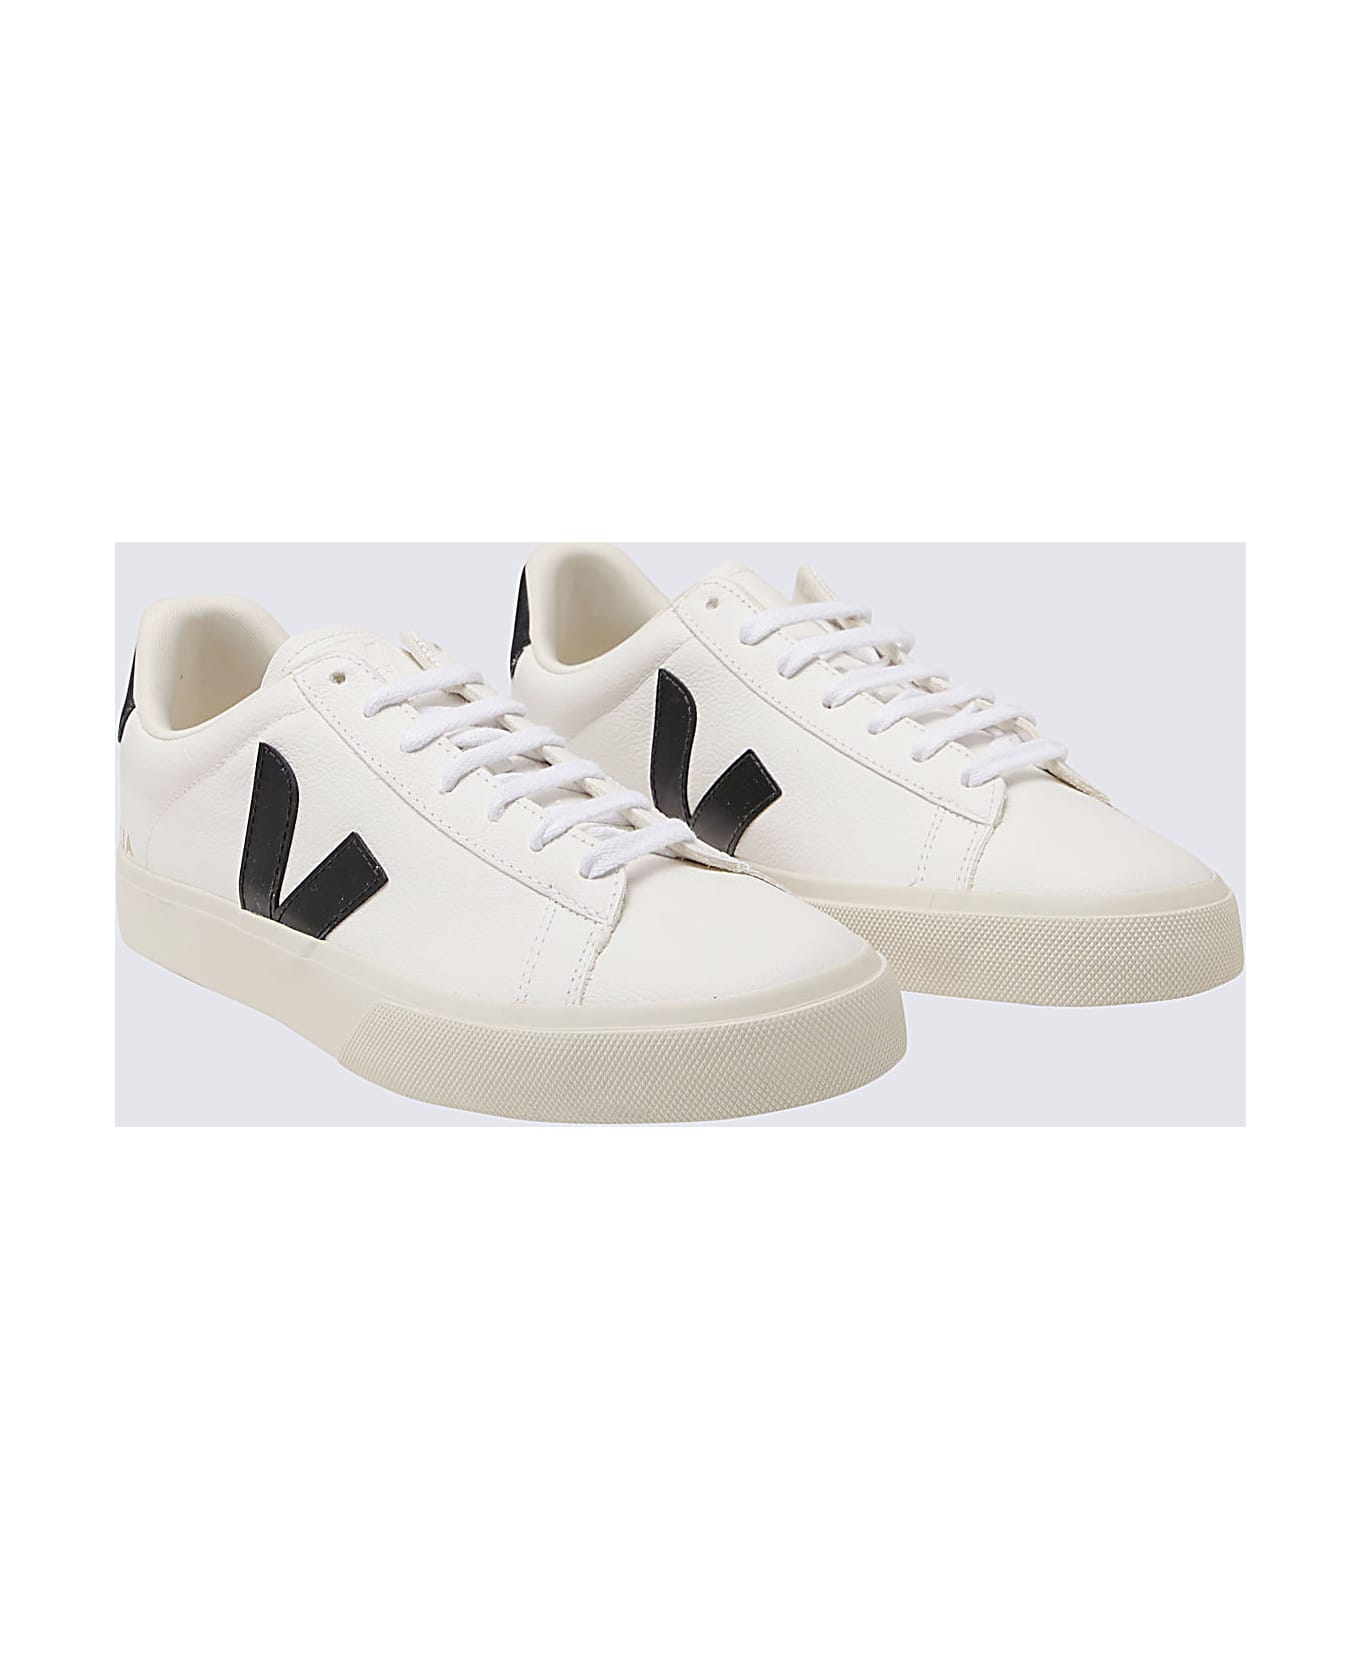 Veja Extra White And Black Faux Leather Campo Sneakers - EXTRA-WHITE/BLACK スニーカー